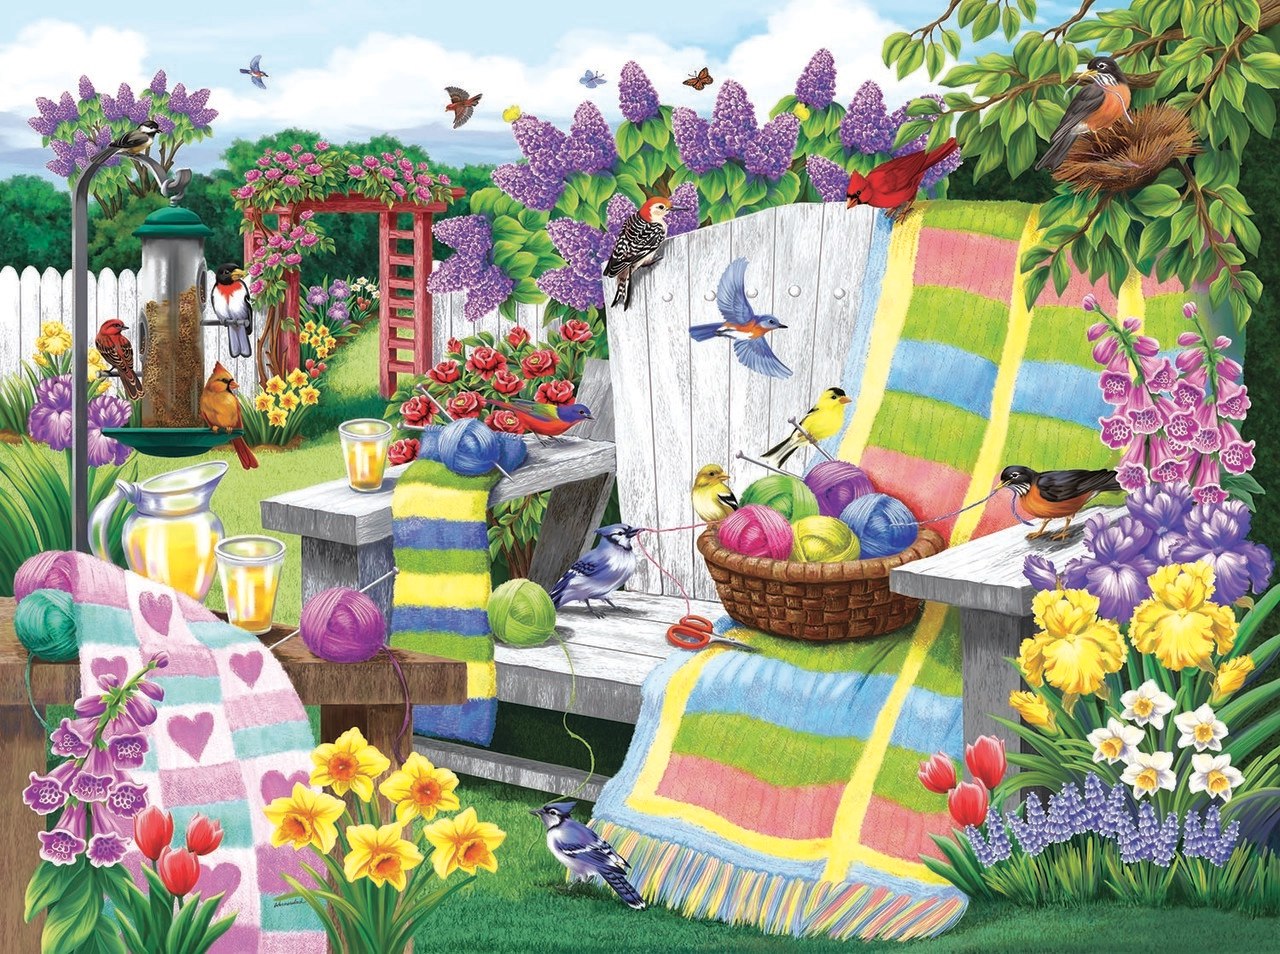 The Many Colors of Spring - 1000pc Jigsaw Puzzle By Sunsout  			  					NEW